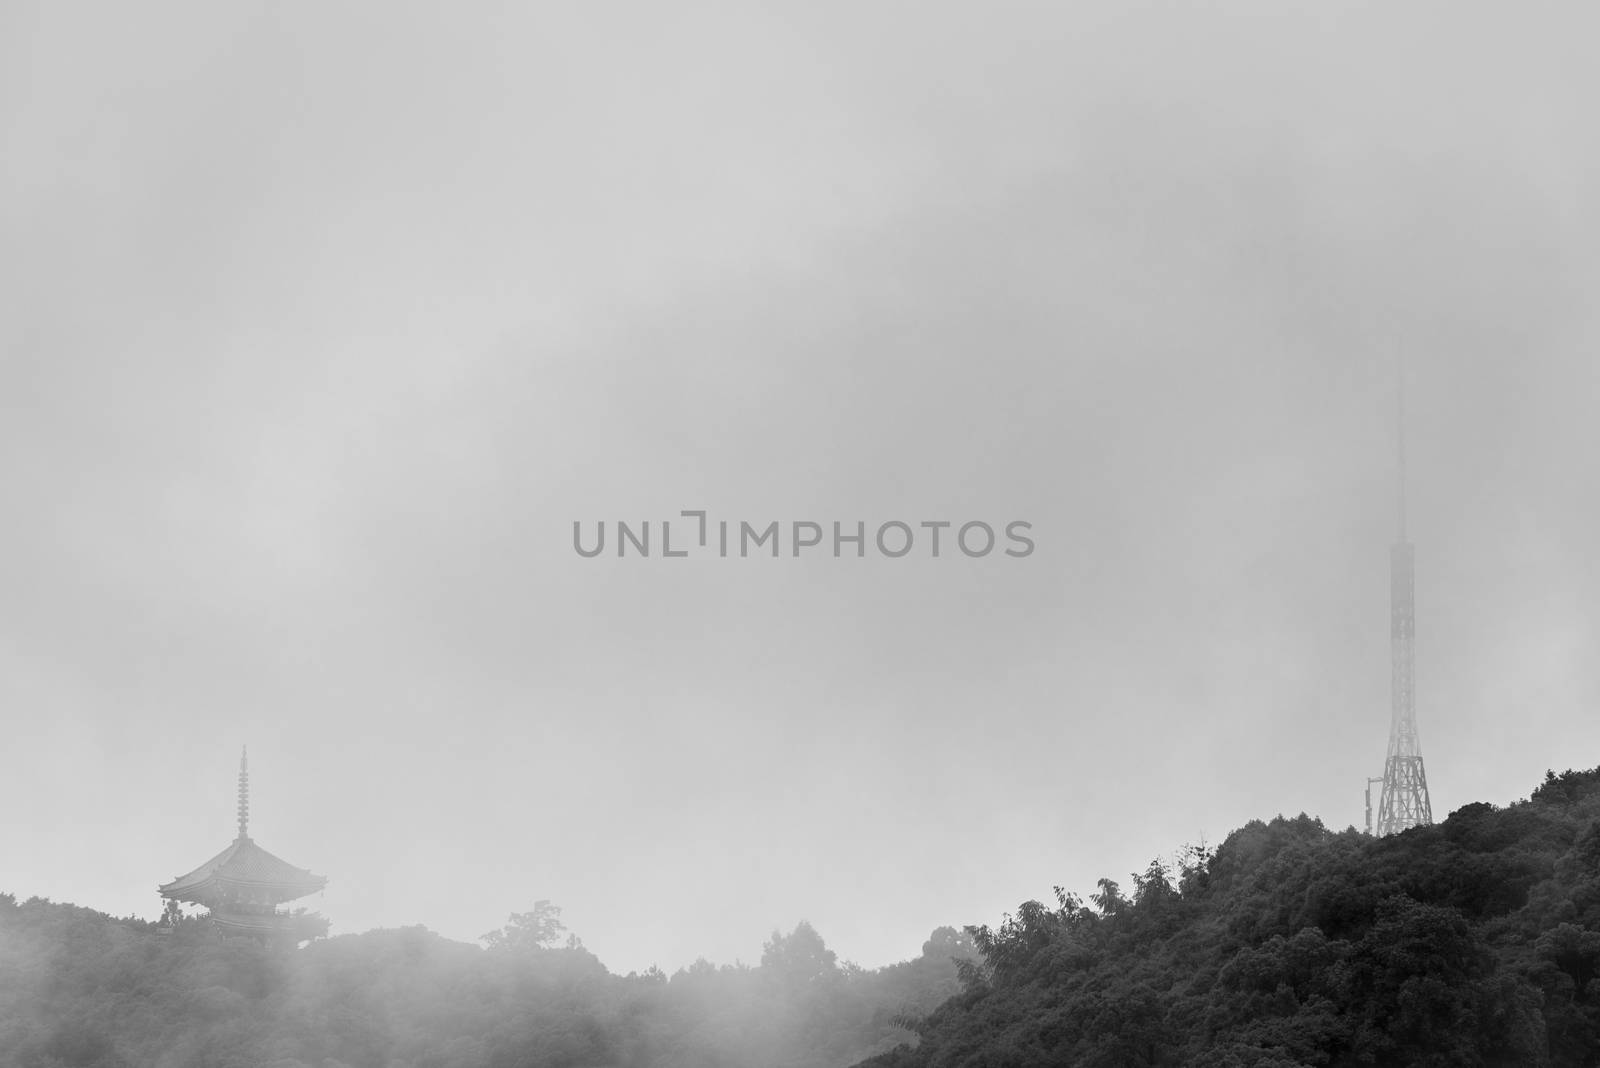 Japanese Pagoda and Radio Tower on Foggy Mountain by justtscott